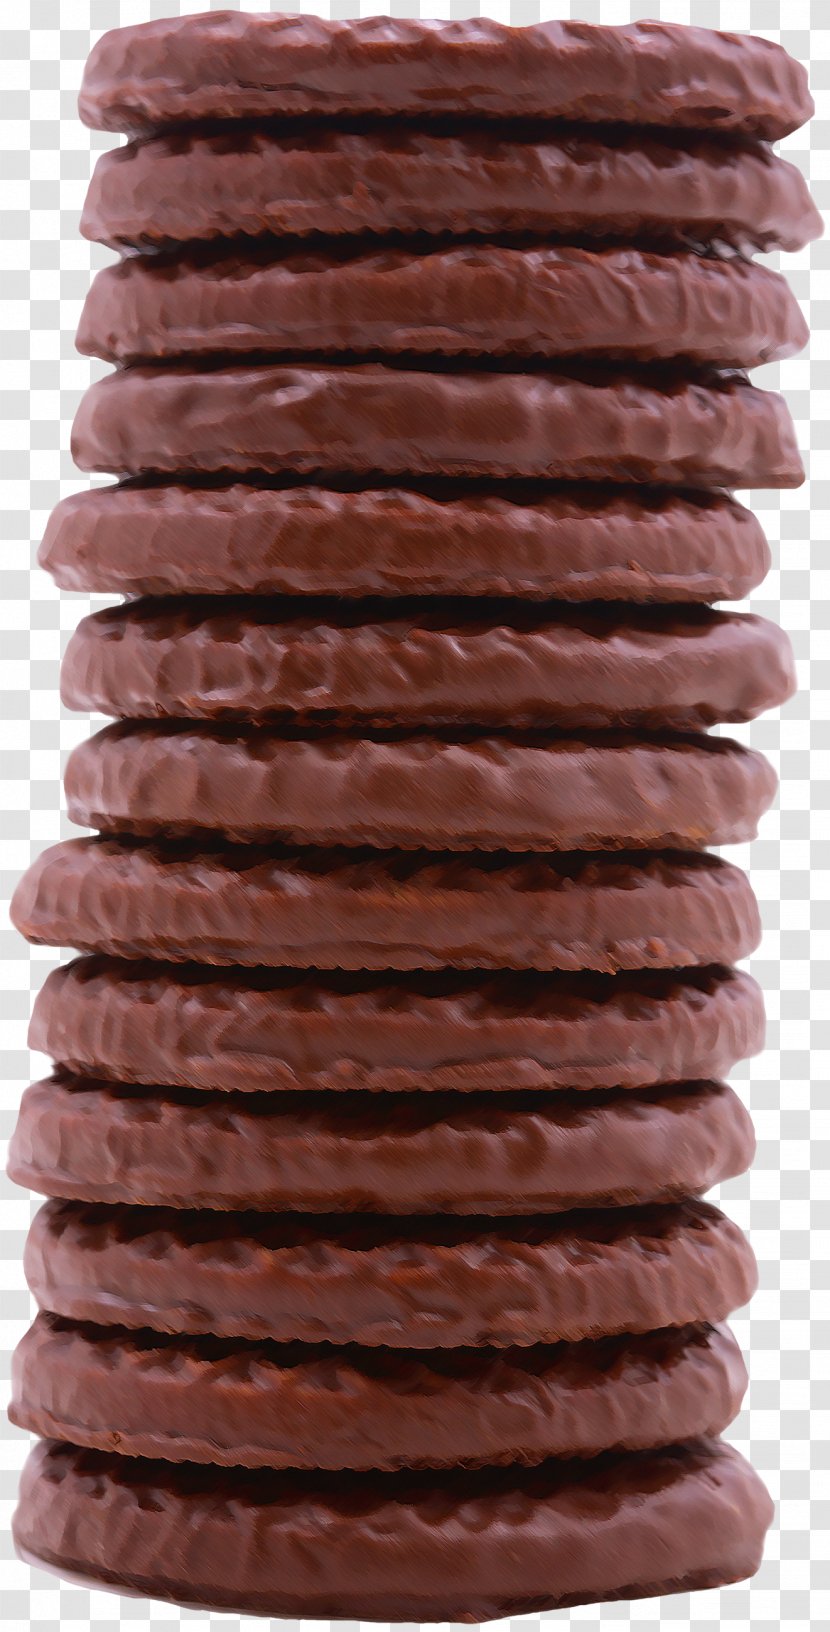 Chocolate Truffle White Chip Cookie - Stacked Cookies Transparent PNG